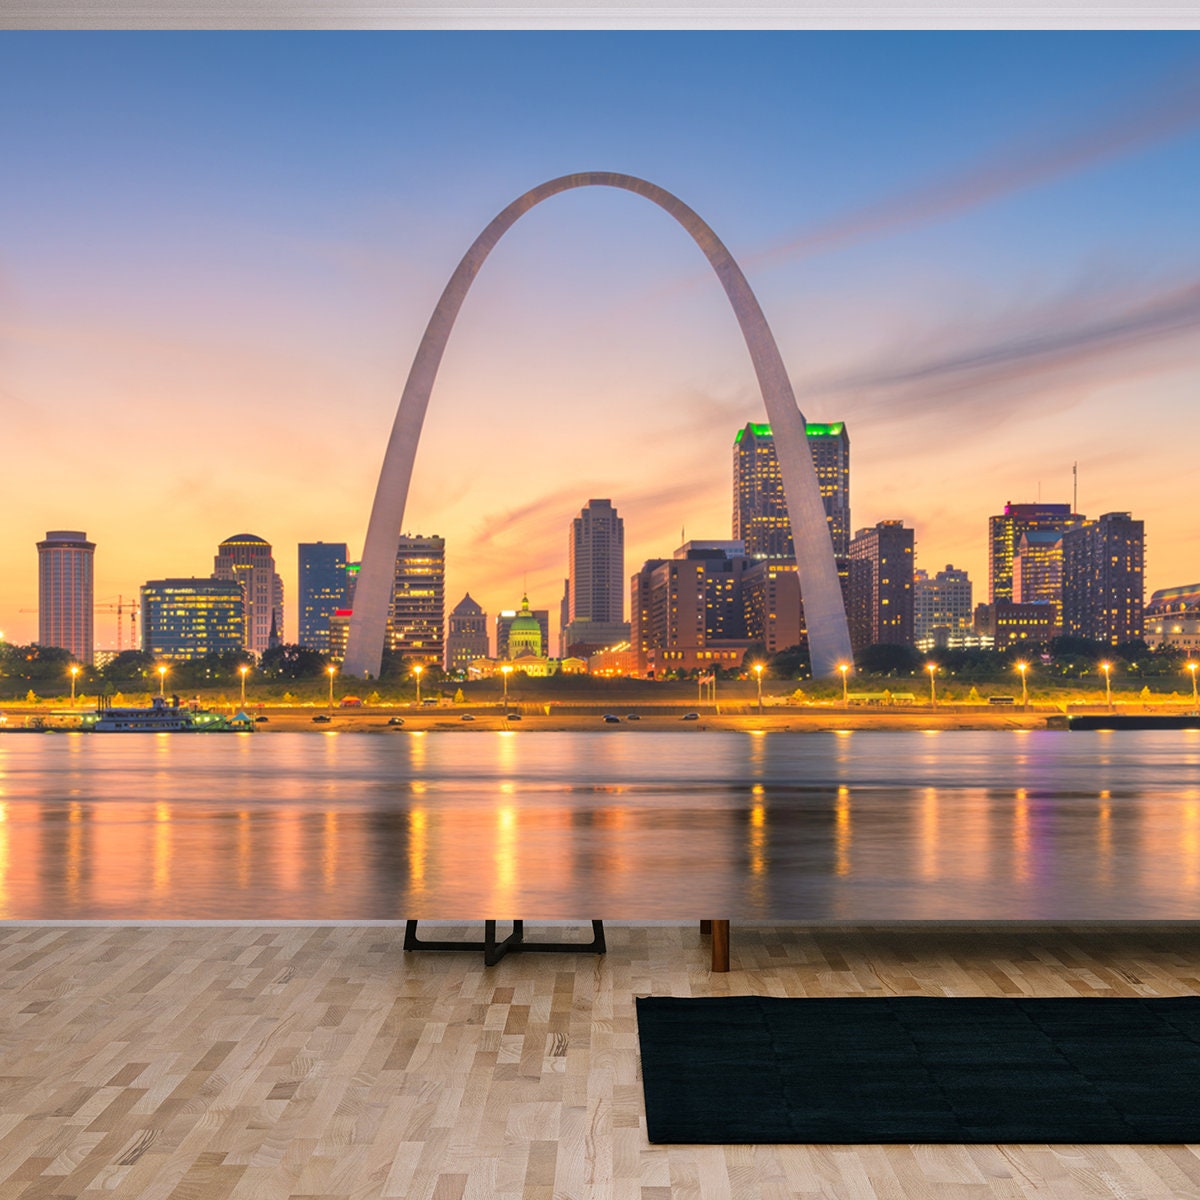 St. Louis, Missouri, USA Downtown Cityscape on the River at Dusk Wallpaper Living Room Mural